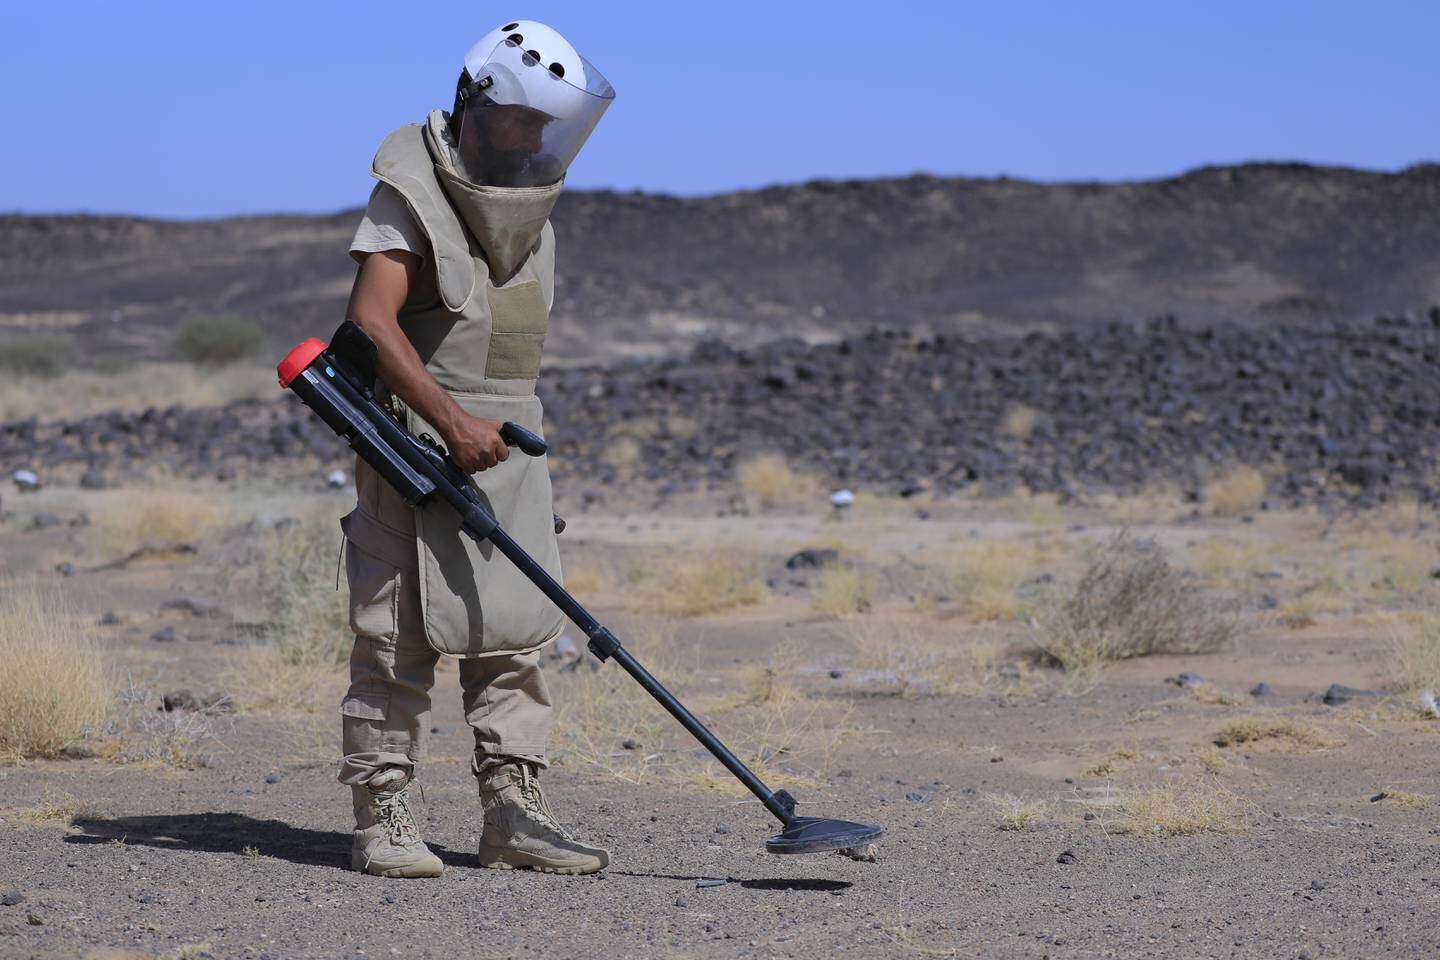 Since 2018, workers on the Saudi-funded project Masam have been removing landmines and other explosive devices in Yemen. Photo: Masam